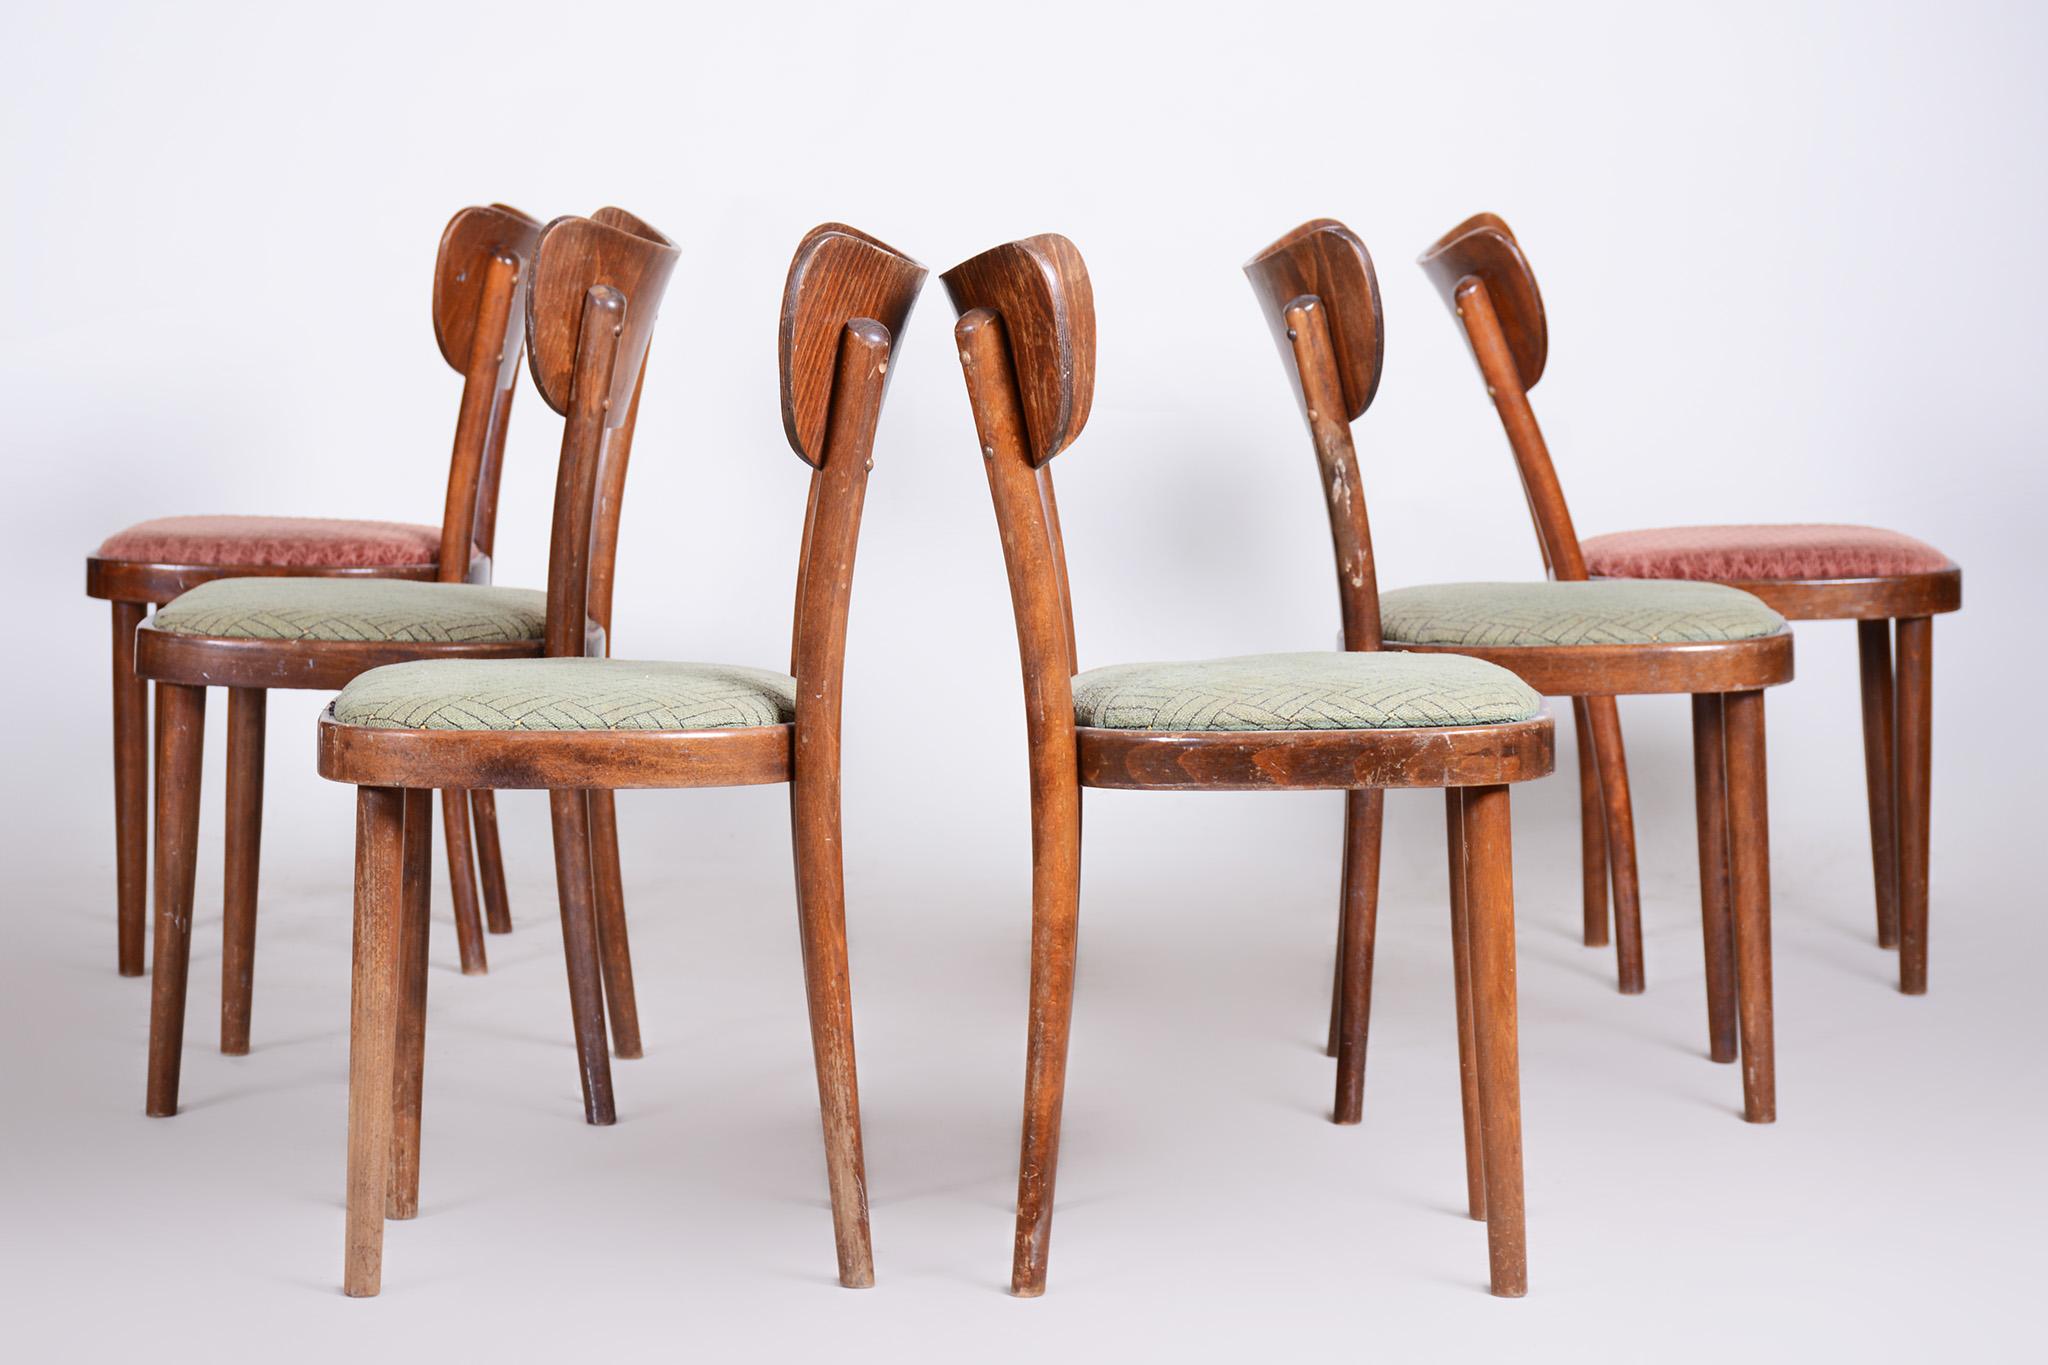 Beech Set of 6 Dining Chairs Made by TON - 1940s, Czechia For Sale